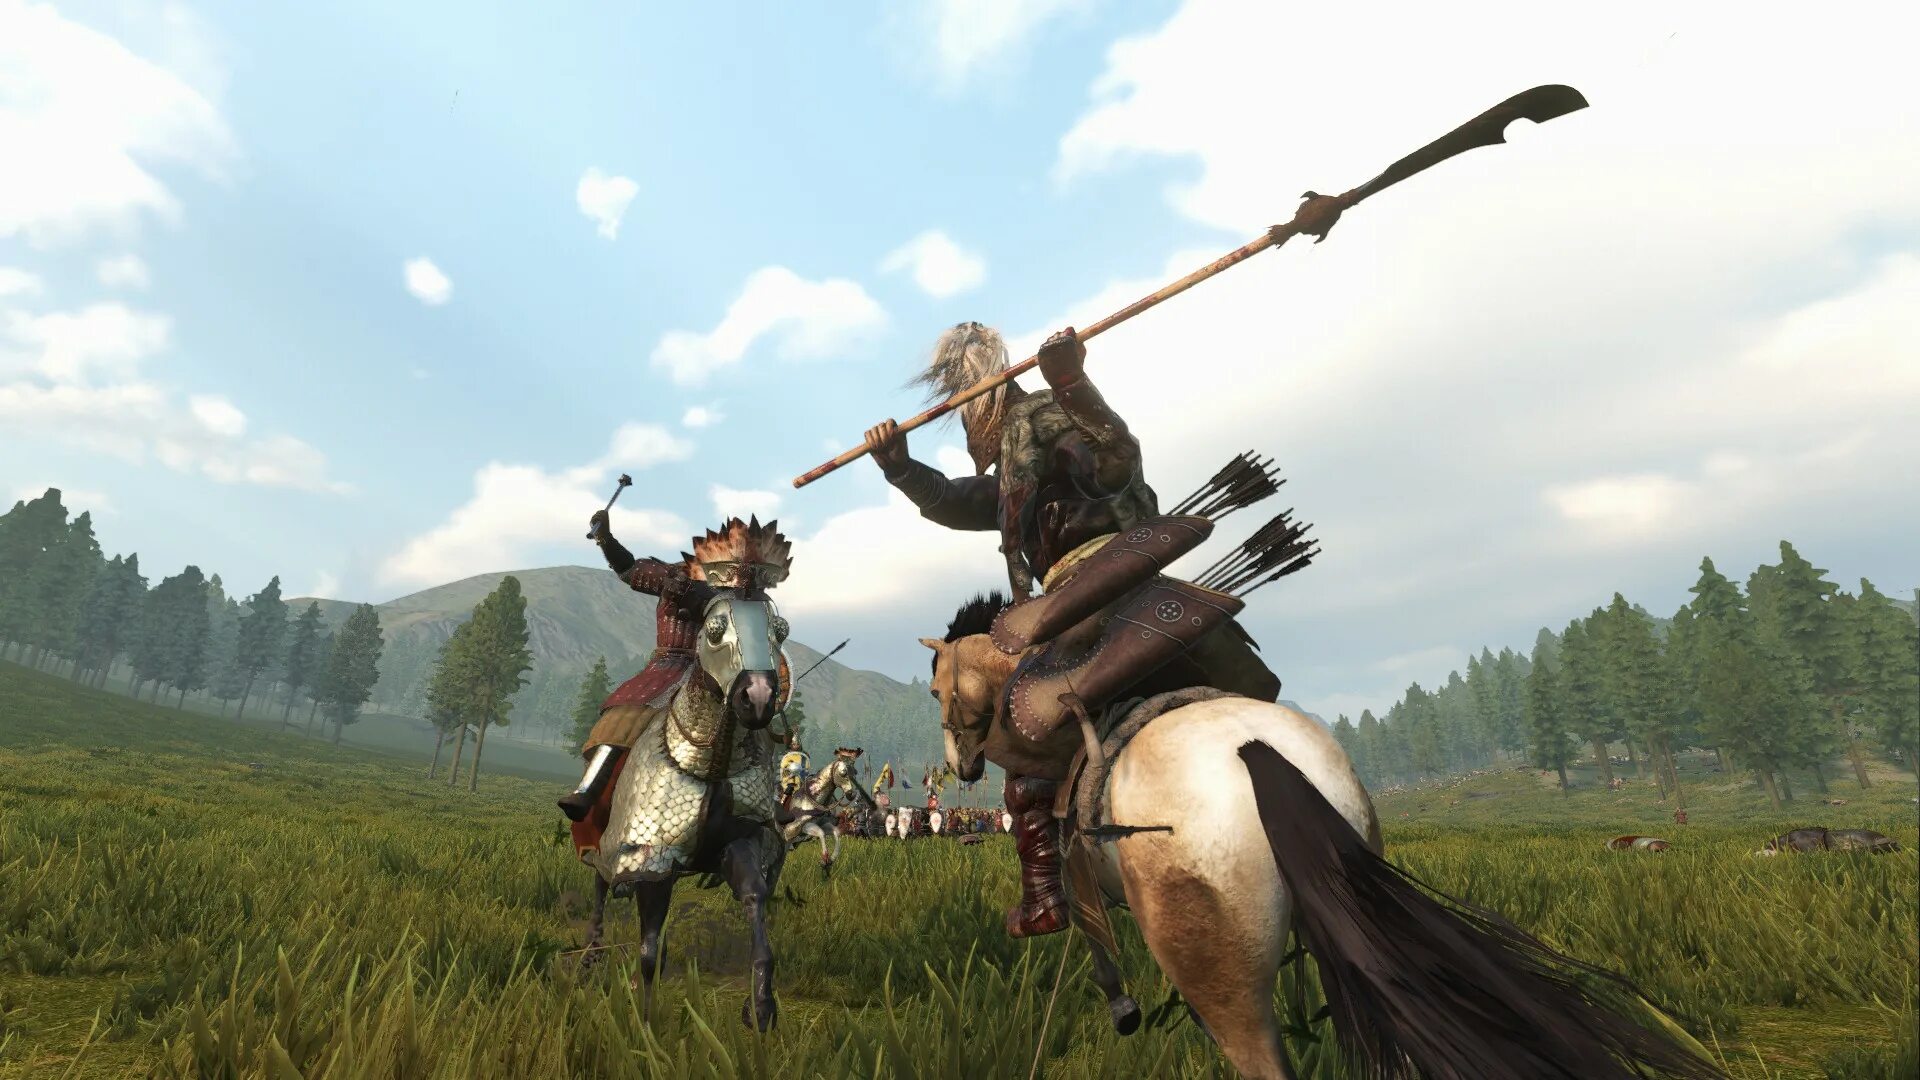 Mount and Blade 2 Bannerlord. Mount and Blade 2 Bannerlord СТУРГИЯ. Монтан блейд баннерлорд. Mount and Blade 2 Bannerlord Фалькс.